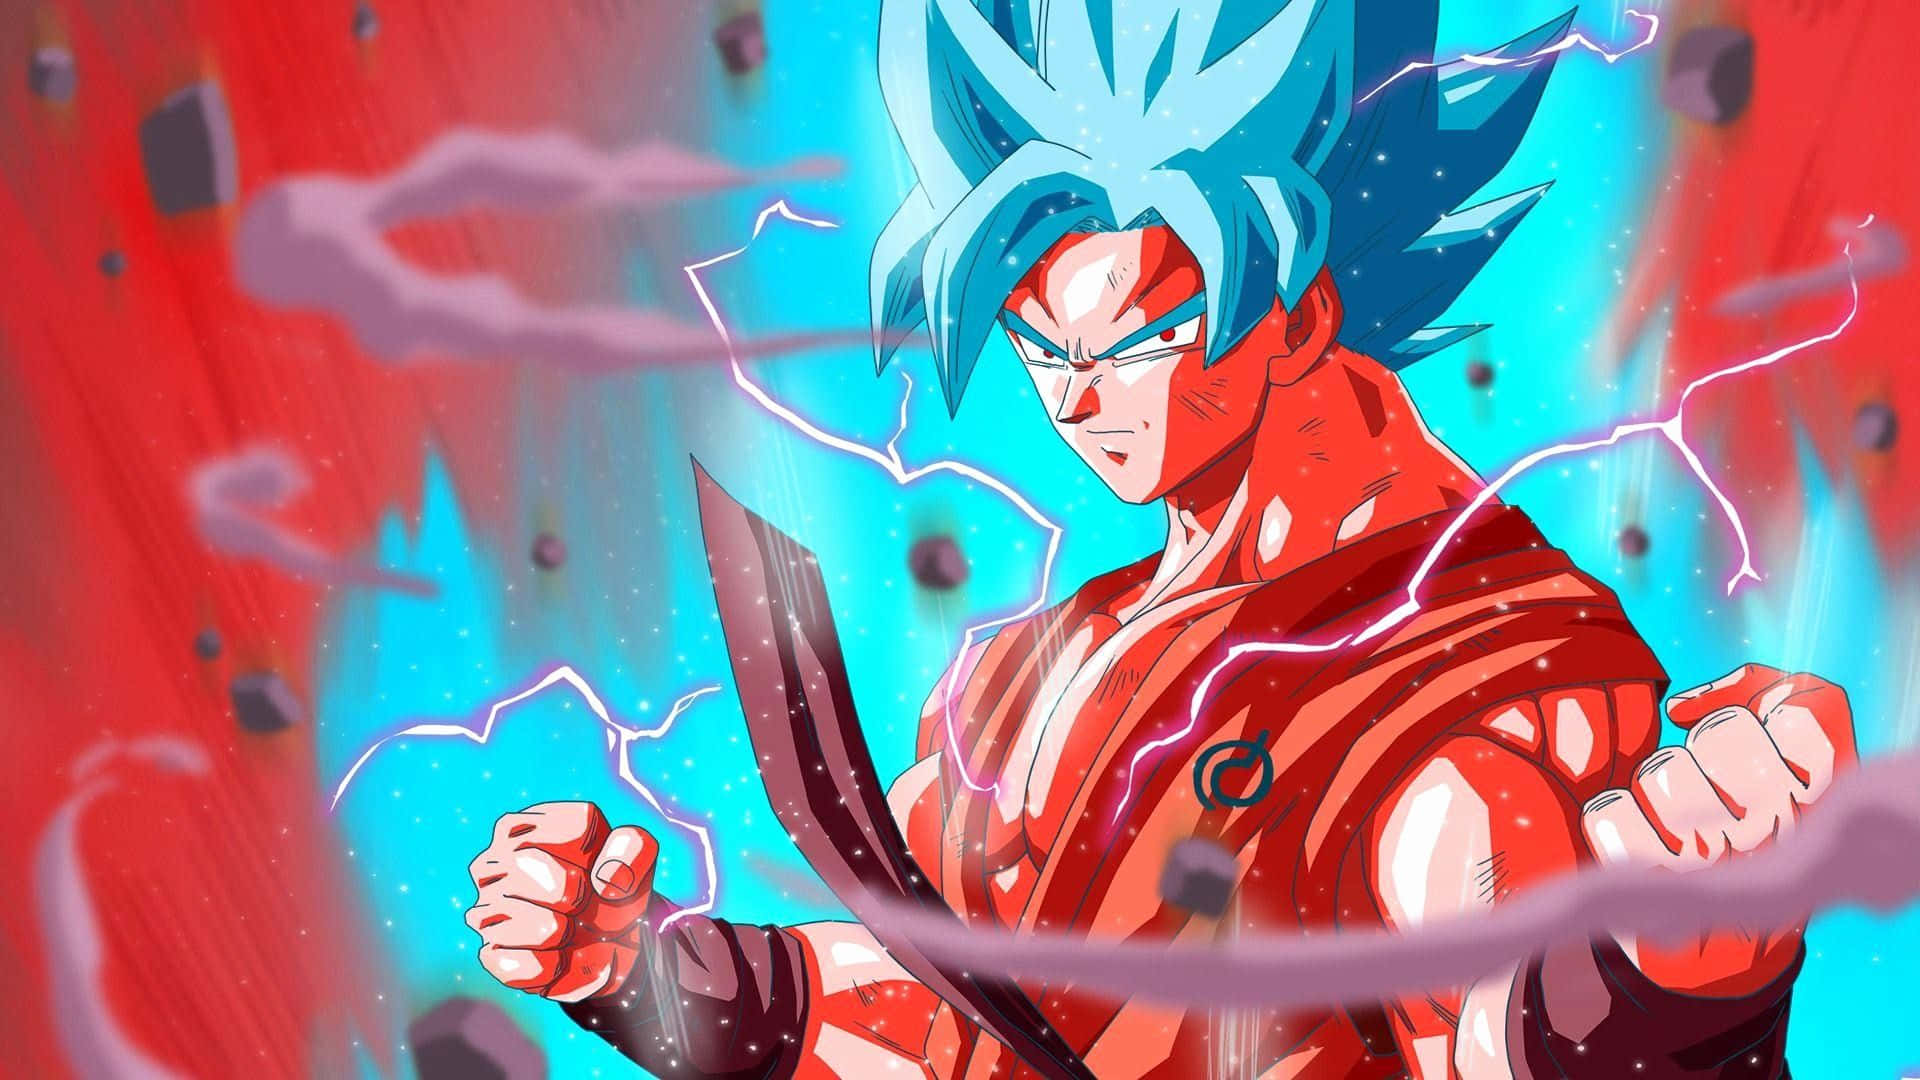 Unlock Super Saiyan Blue power with these awesome Dragon Ball Z wallpapers Wallpaper